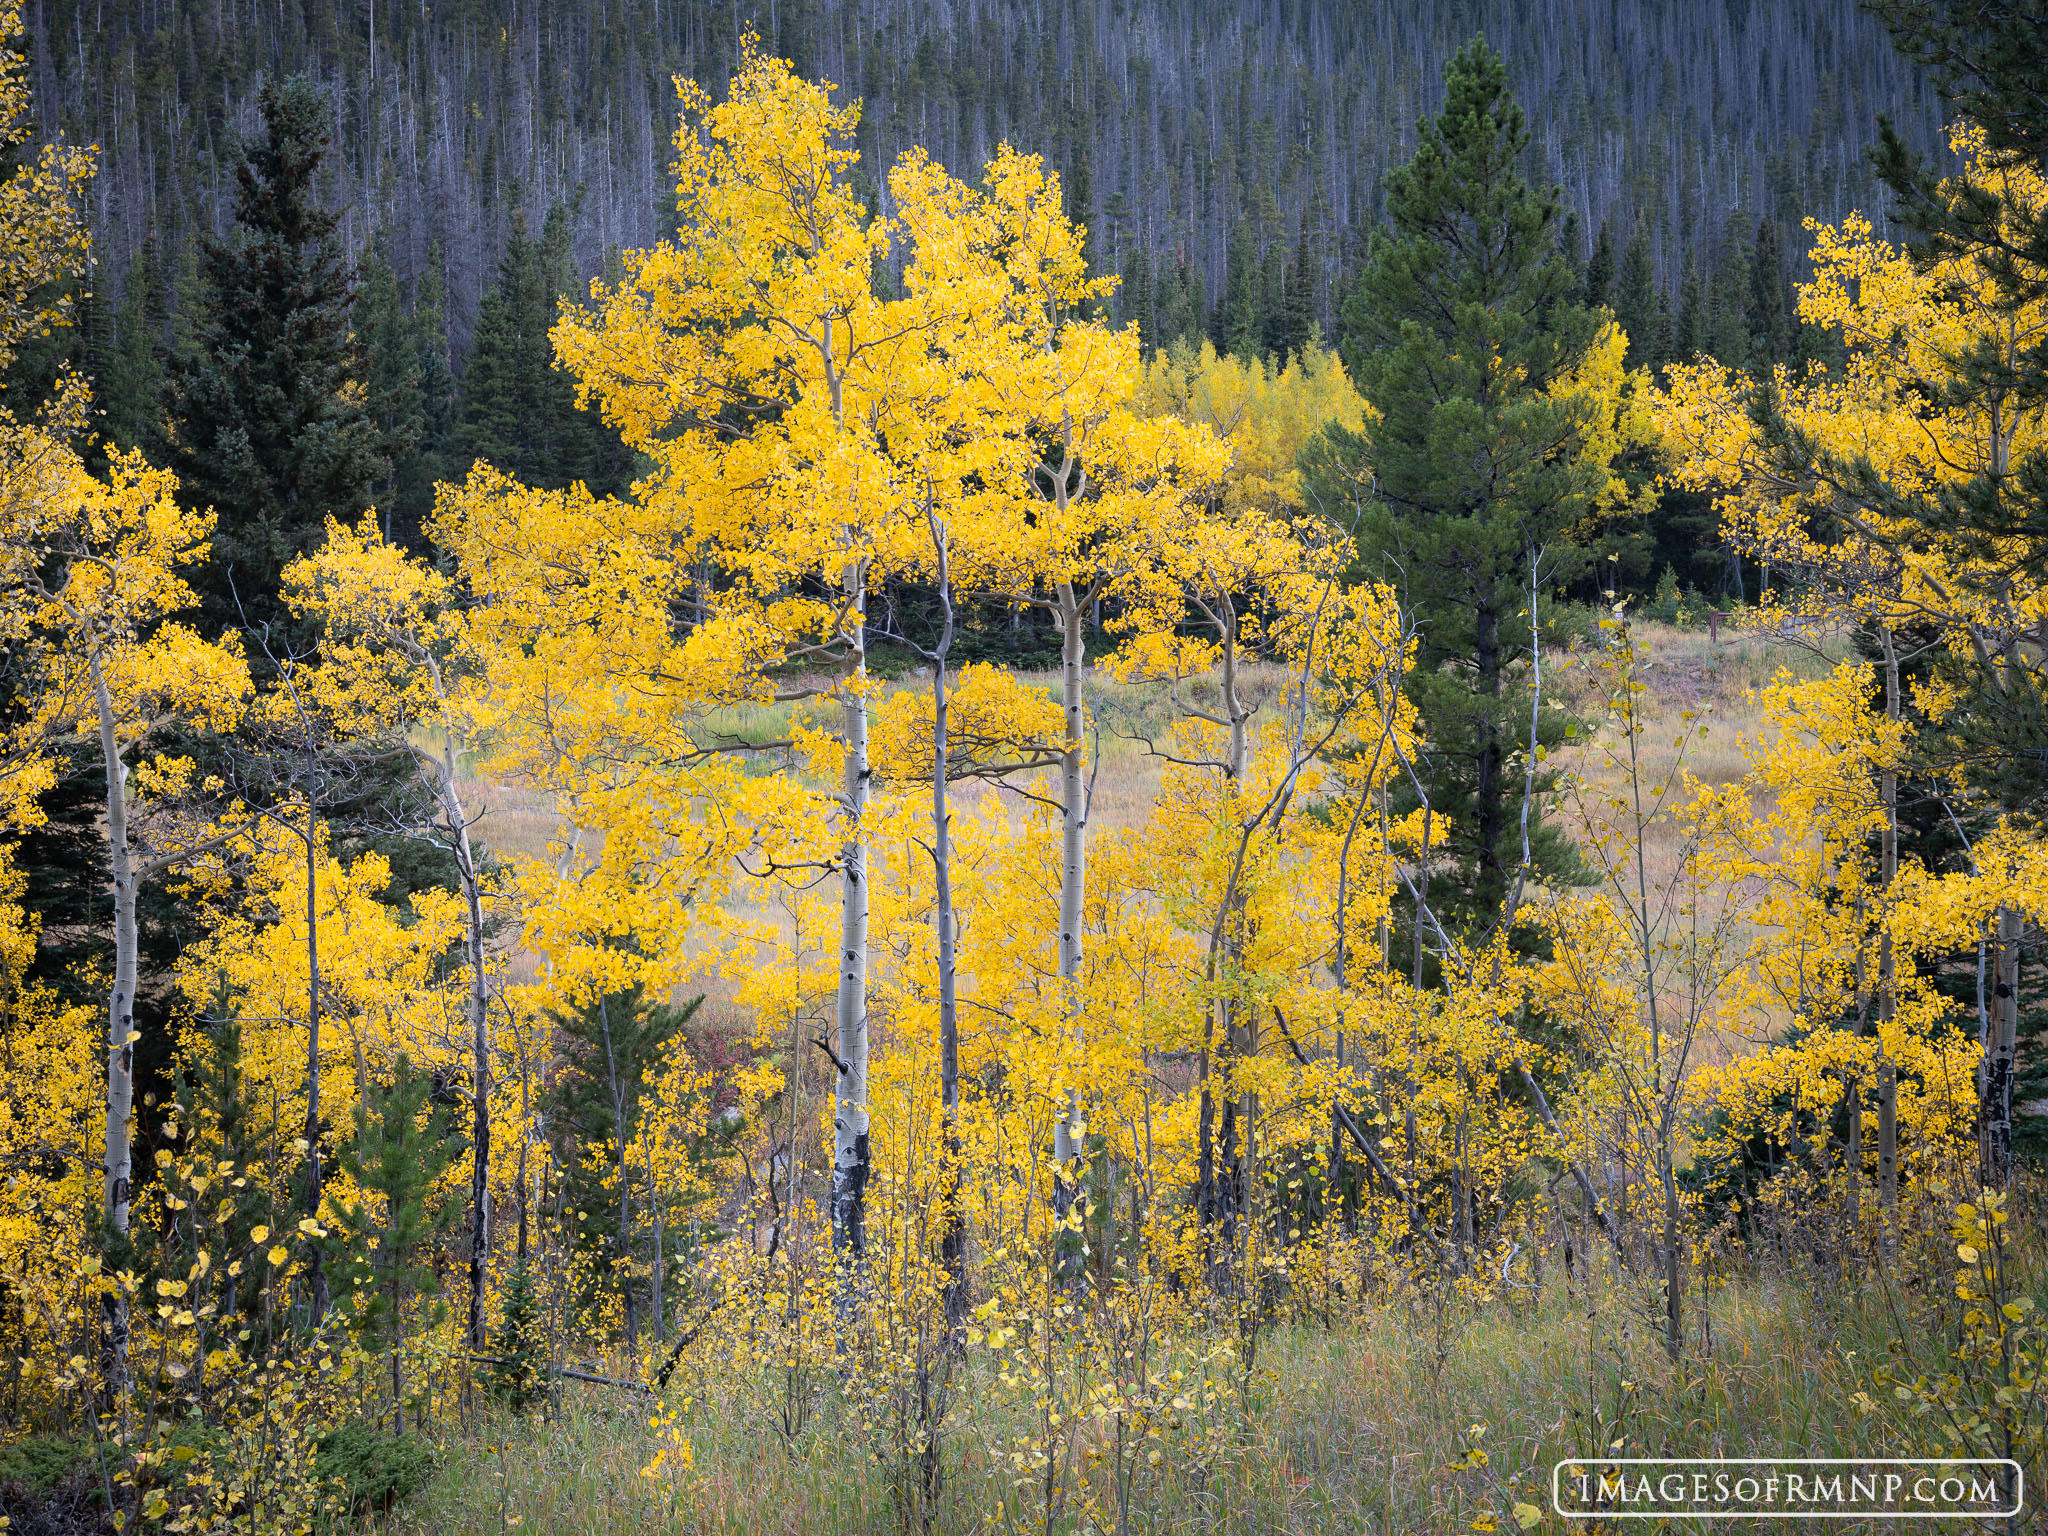 These graceful aspen stand at the entance to Hidden Valley welcoming all who come.